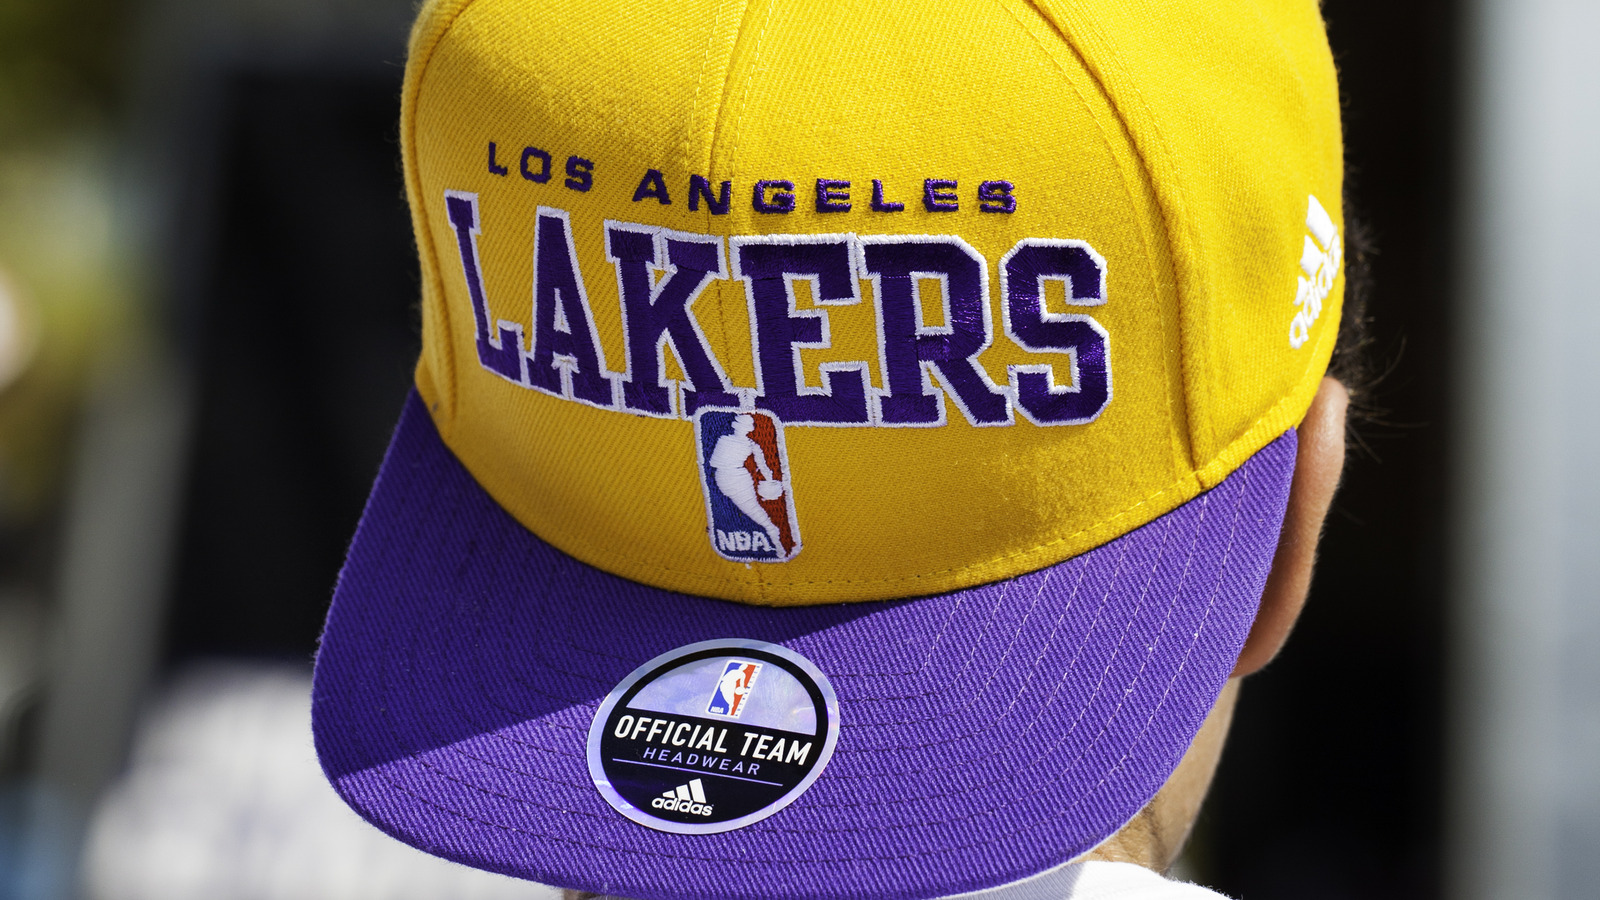 Lakers uniforms beg question: What's 'the purple and gold' without